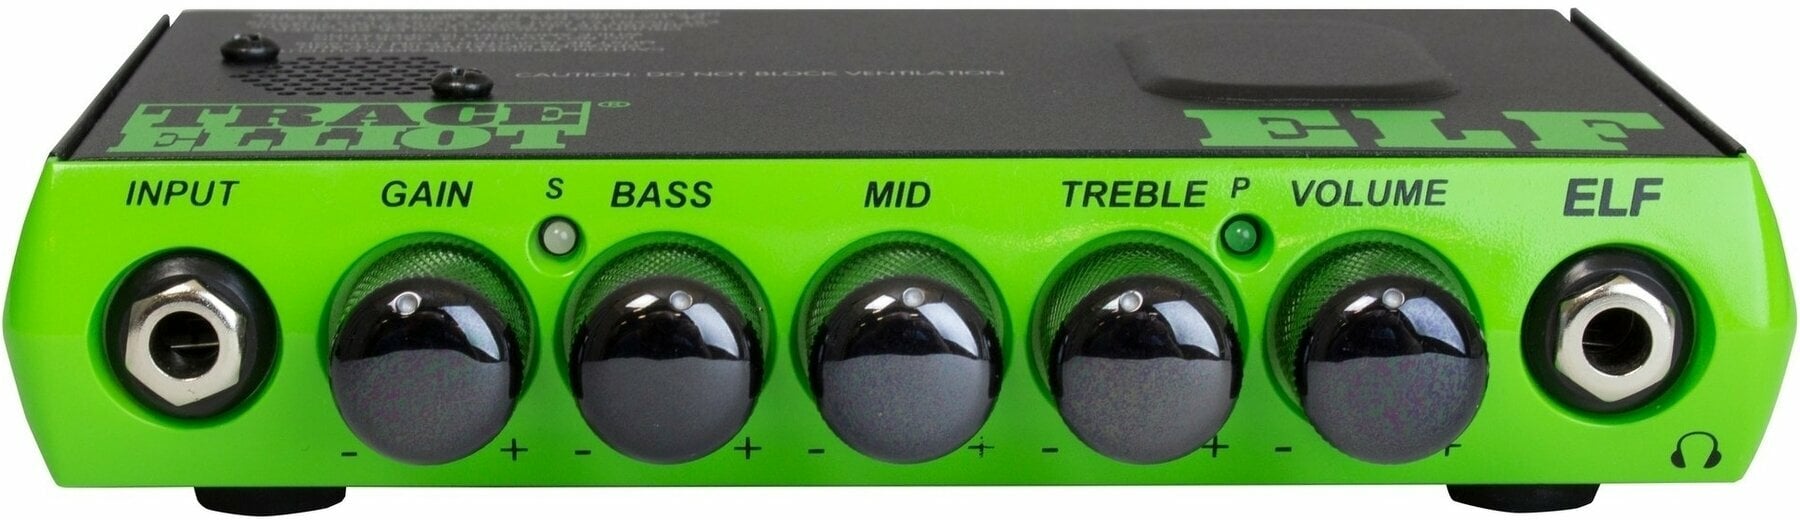 Solid-State Bass Amplifier Trace Elliot Elf